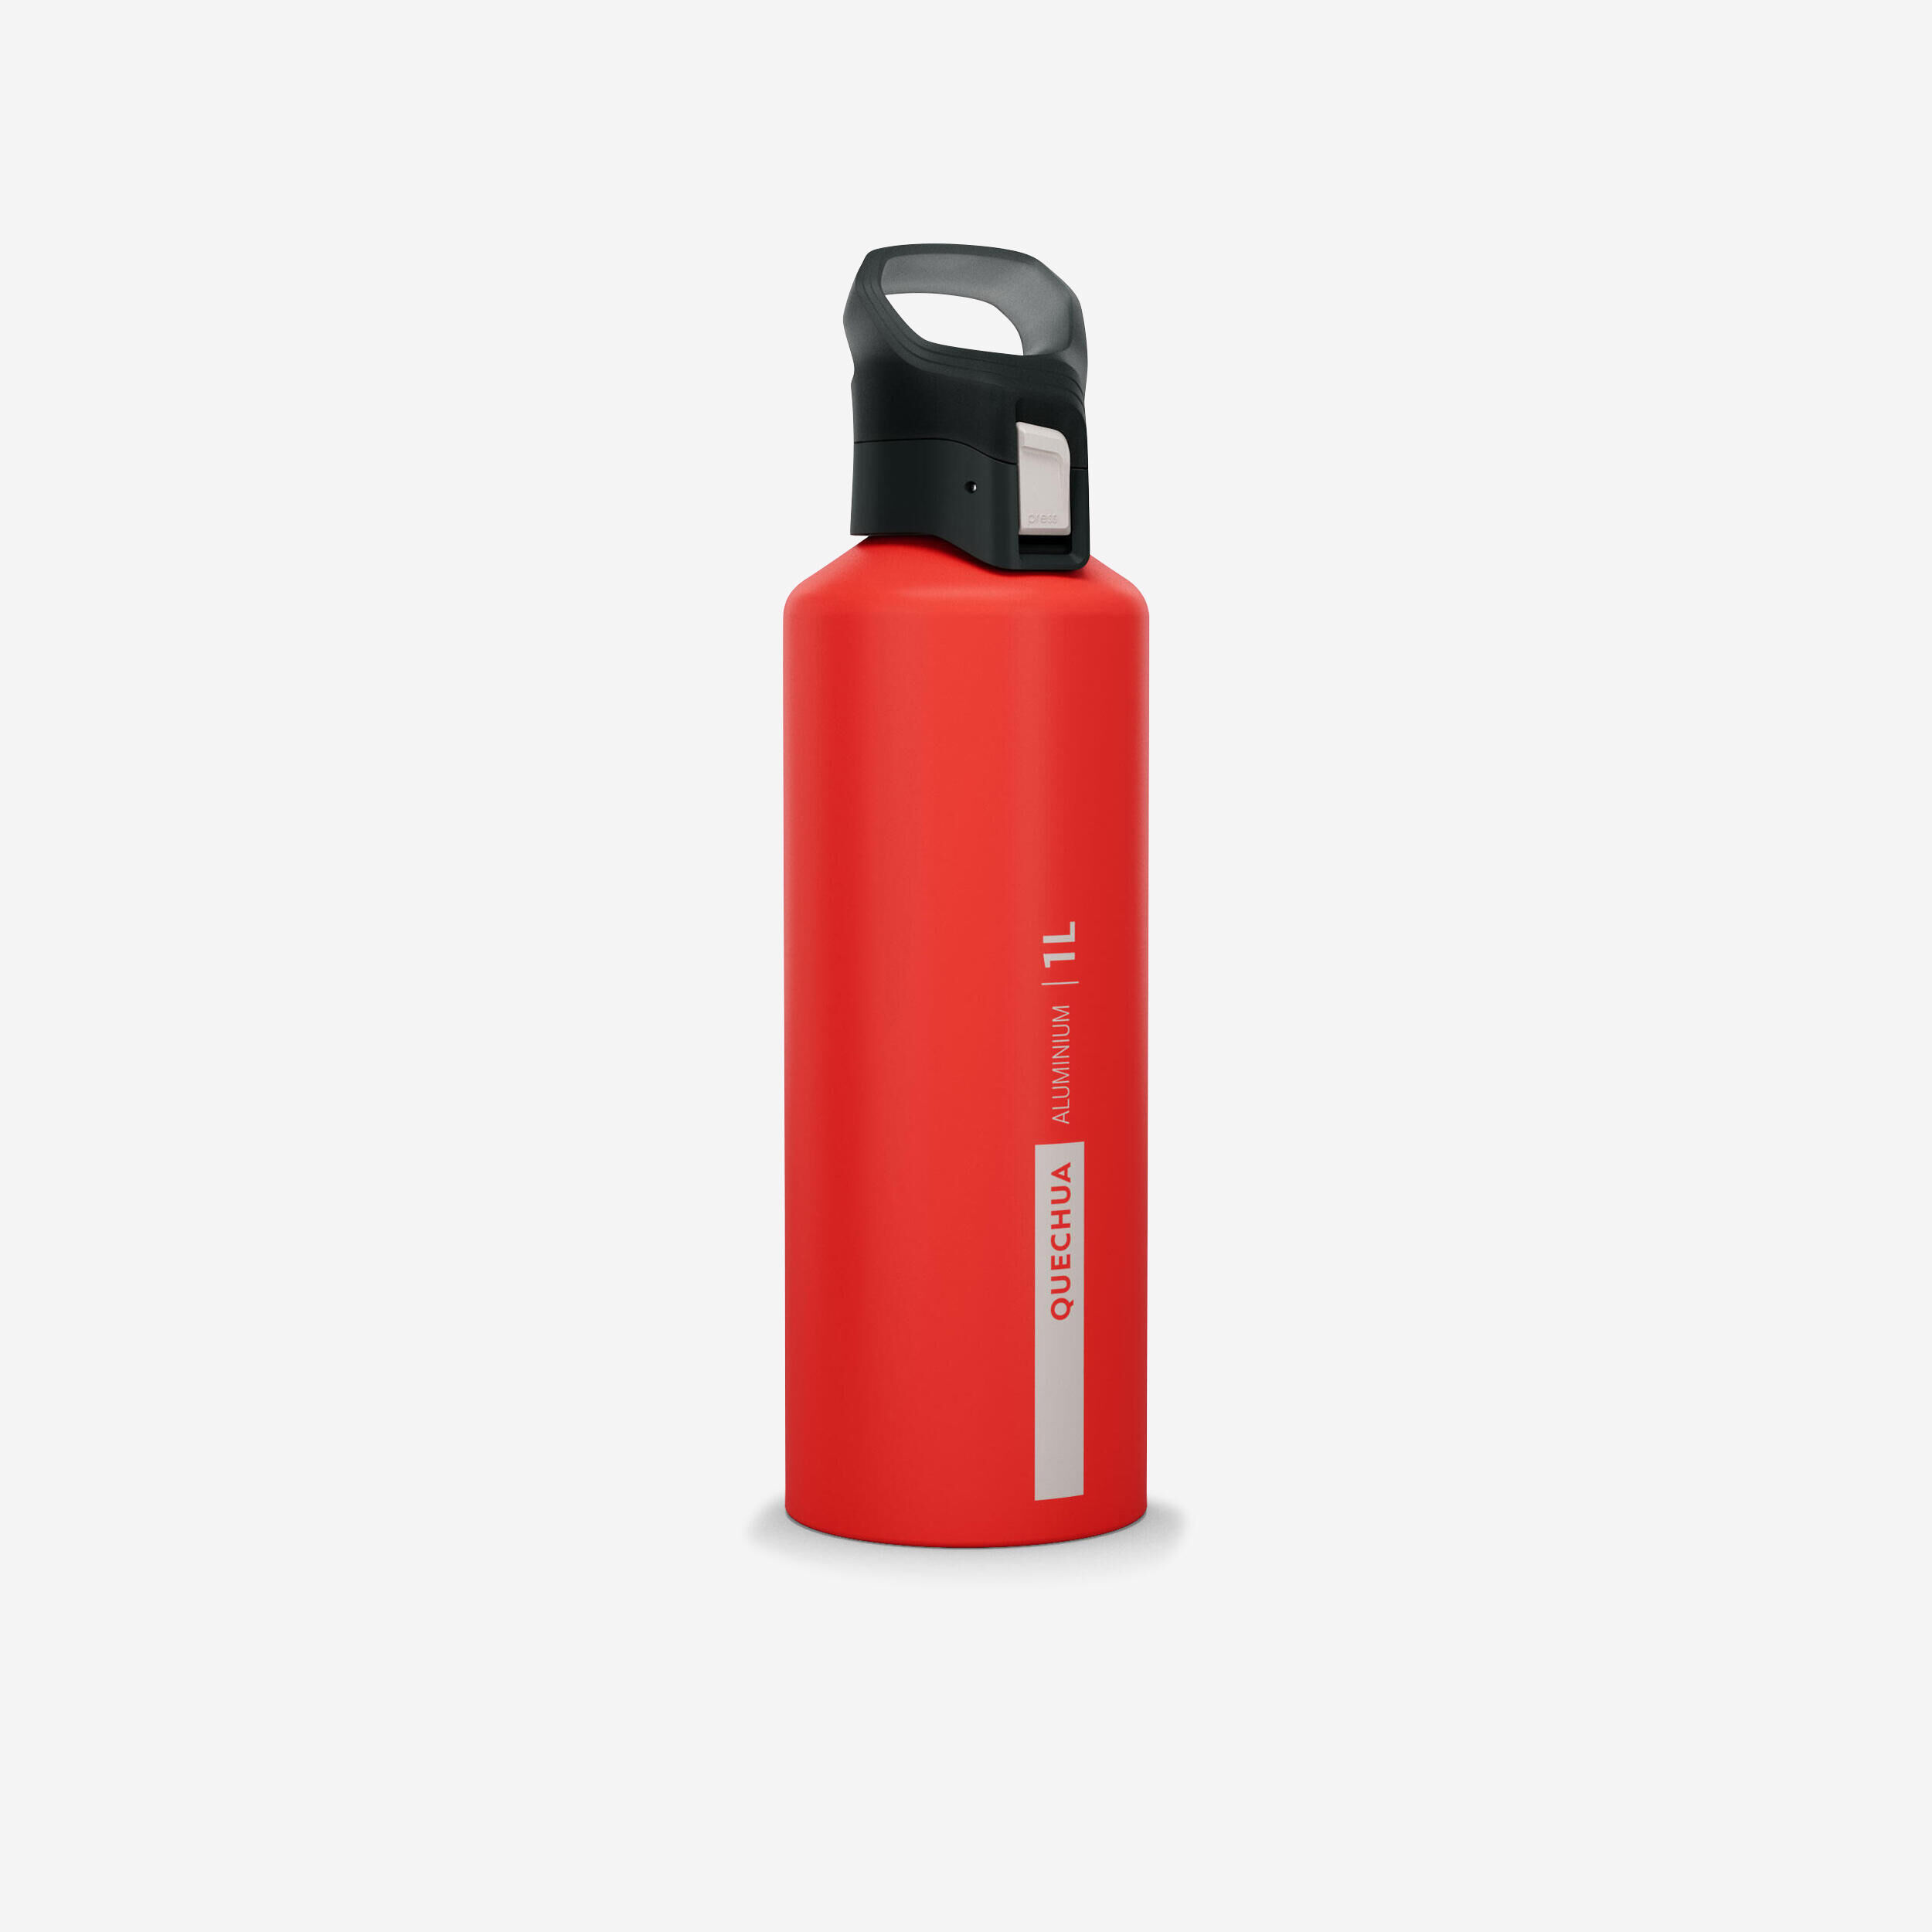 QUECHUA 1 L aluminium water bottle with quick opening cap for hiking - Red